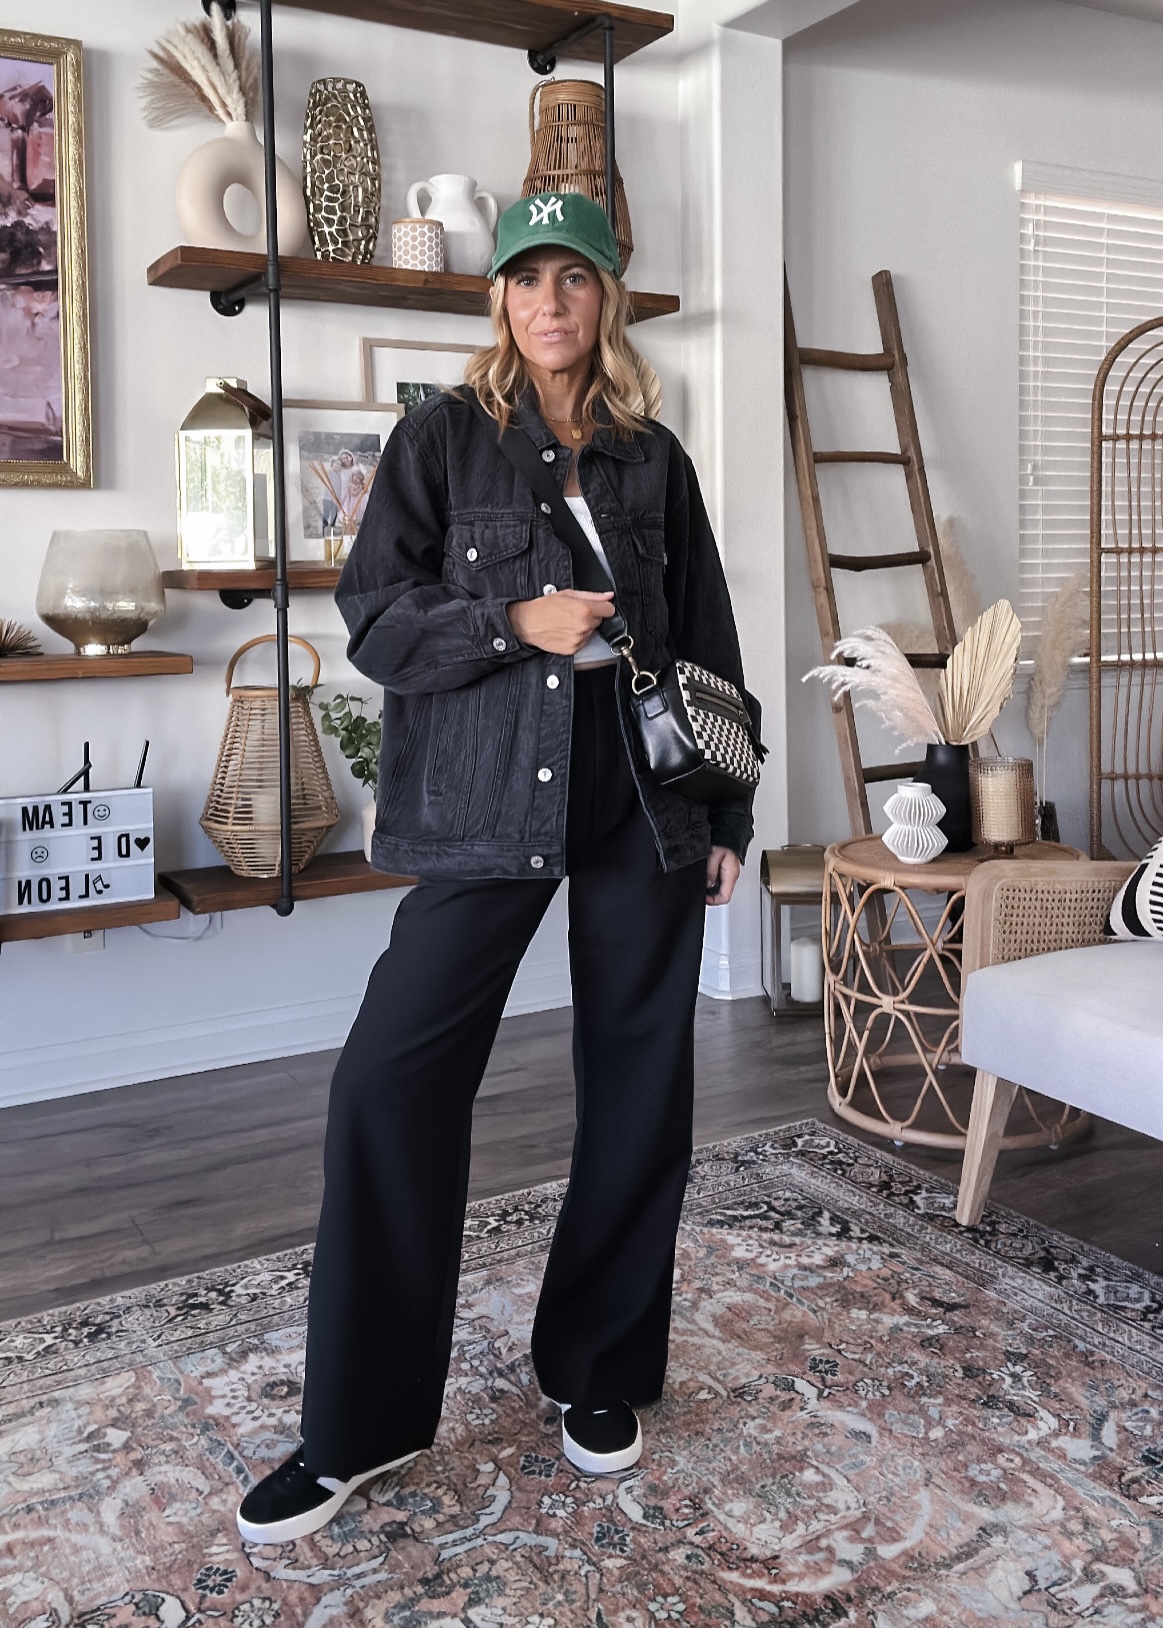 WAYS TO WEAR- BLACK TROUSERS-Jaclyn De Leon Style. Black trousers are a closet staple for the Fall and Winter seasons. They can easily be dressed up or down in numerous ways!